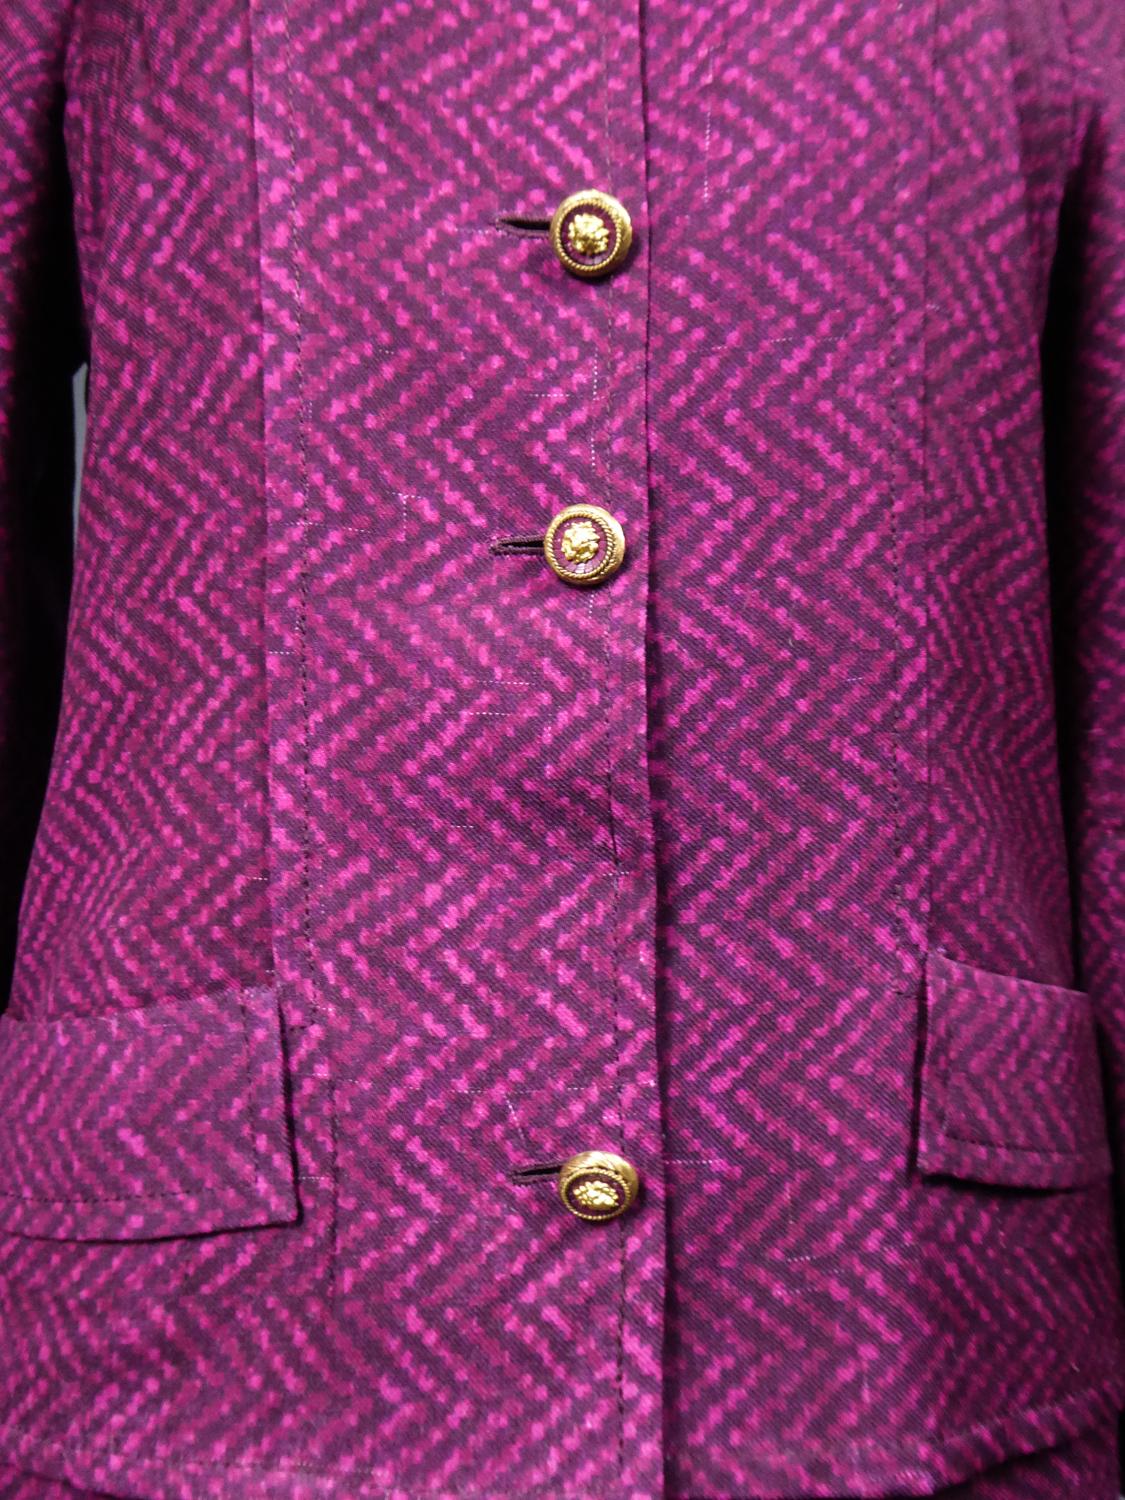 Women's A French Couture Silk Chanel Skirt and Jacket Suit number 60423 & 60422 C. 1980 For Sale